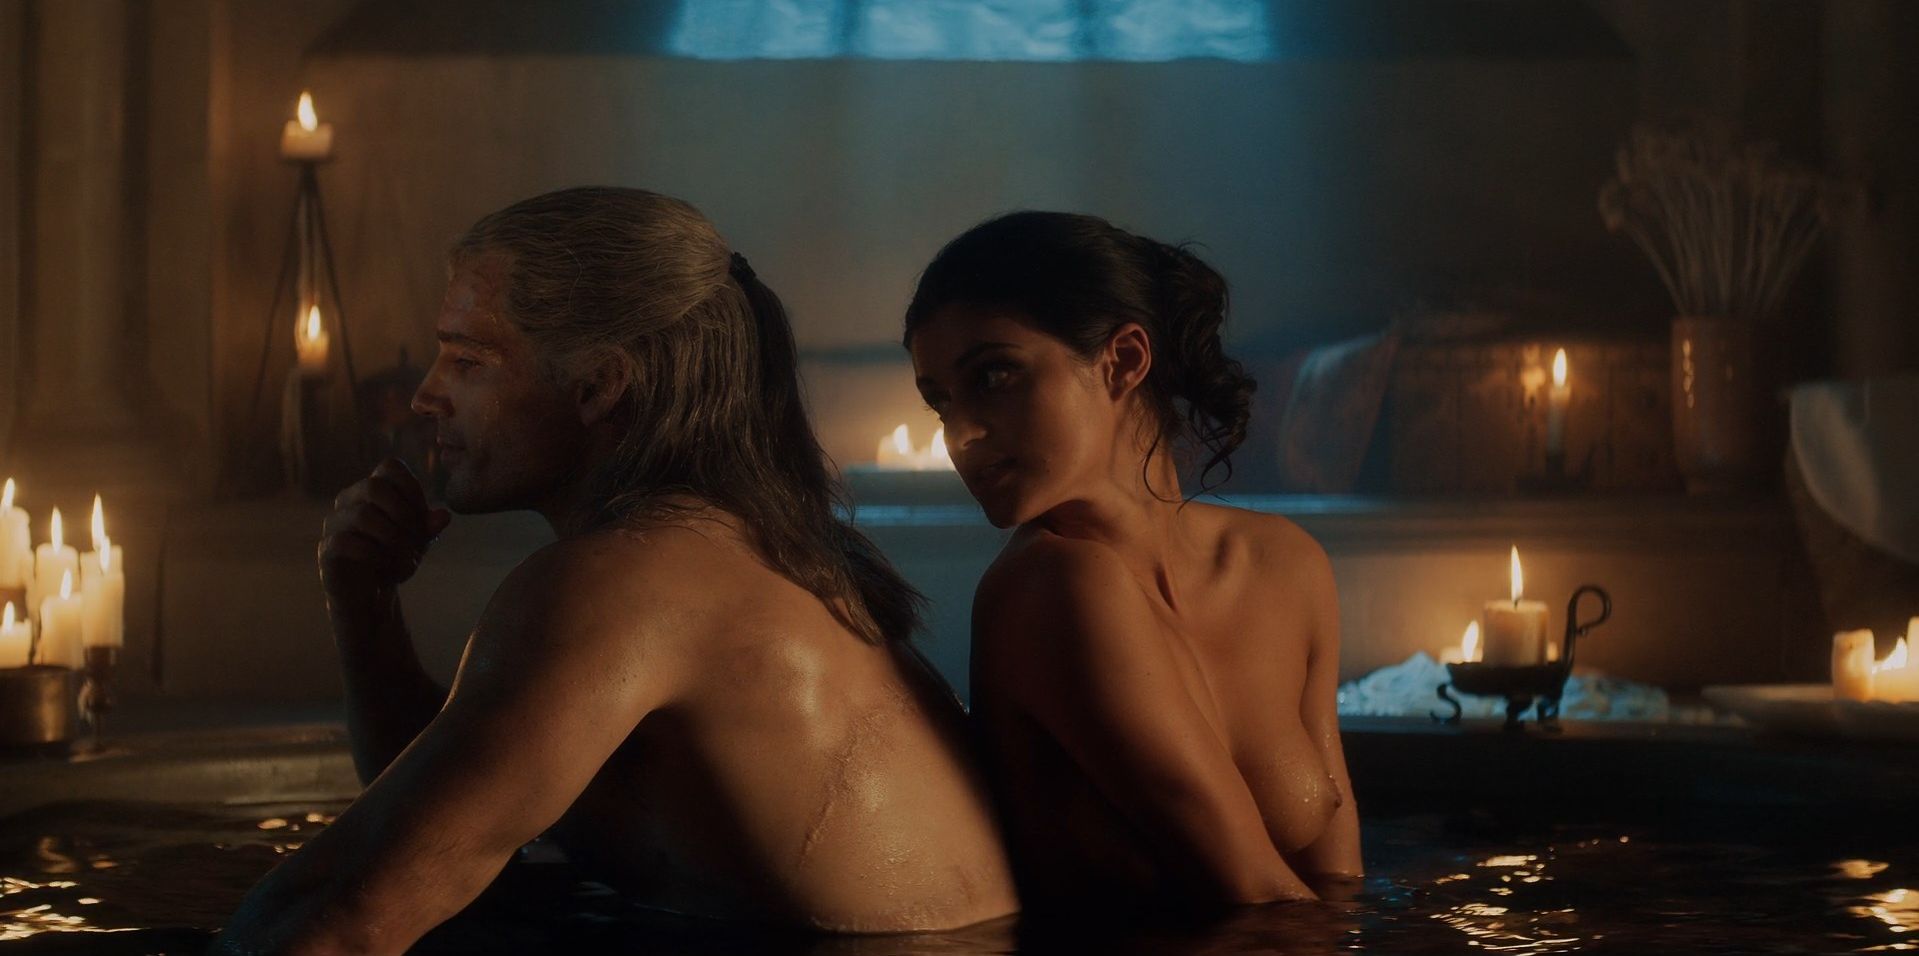 Anya Chalotra Nude - The Witcher (25 Pics + GIFs & Video)